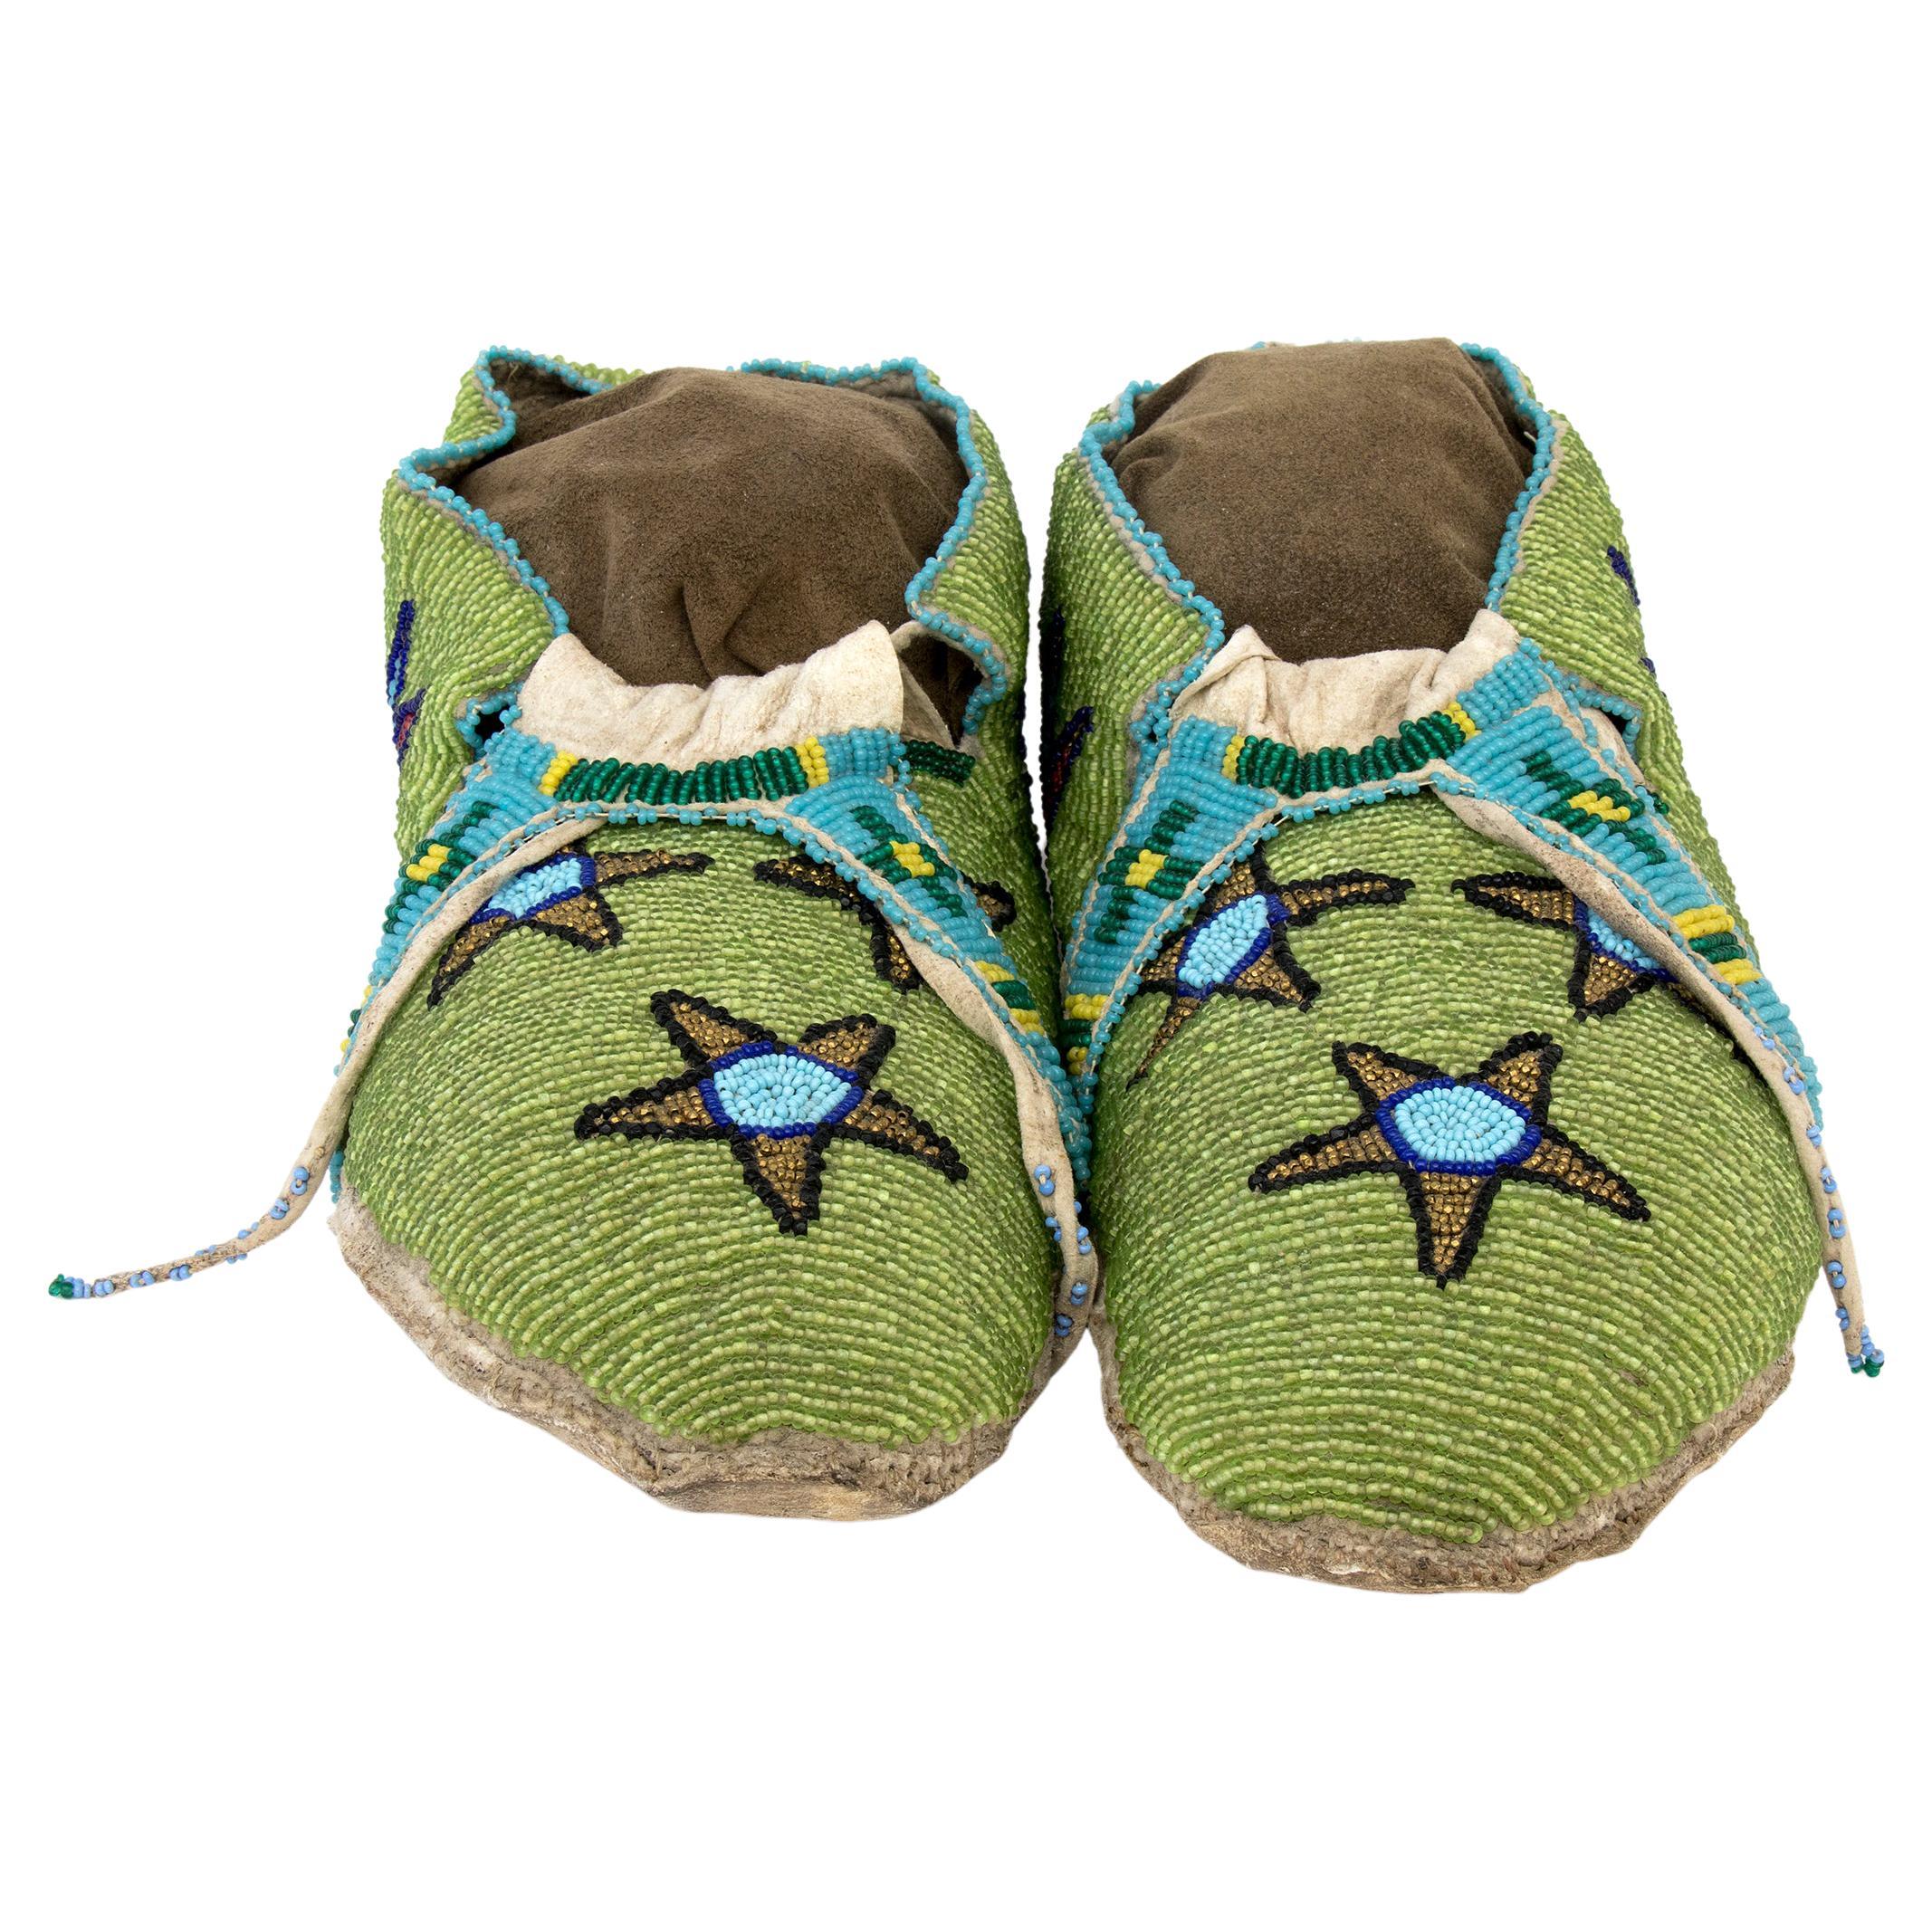 Vintage 19th century Native American Beaded Moccasins, Cree (Plains Indian), circa 1890. Native tanned hide with glass trade beads in green, blue, yellow, red, and white, with pictorial elements including star and cactus flower motifs. Custom